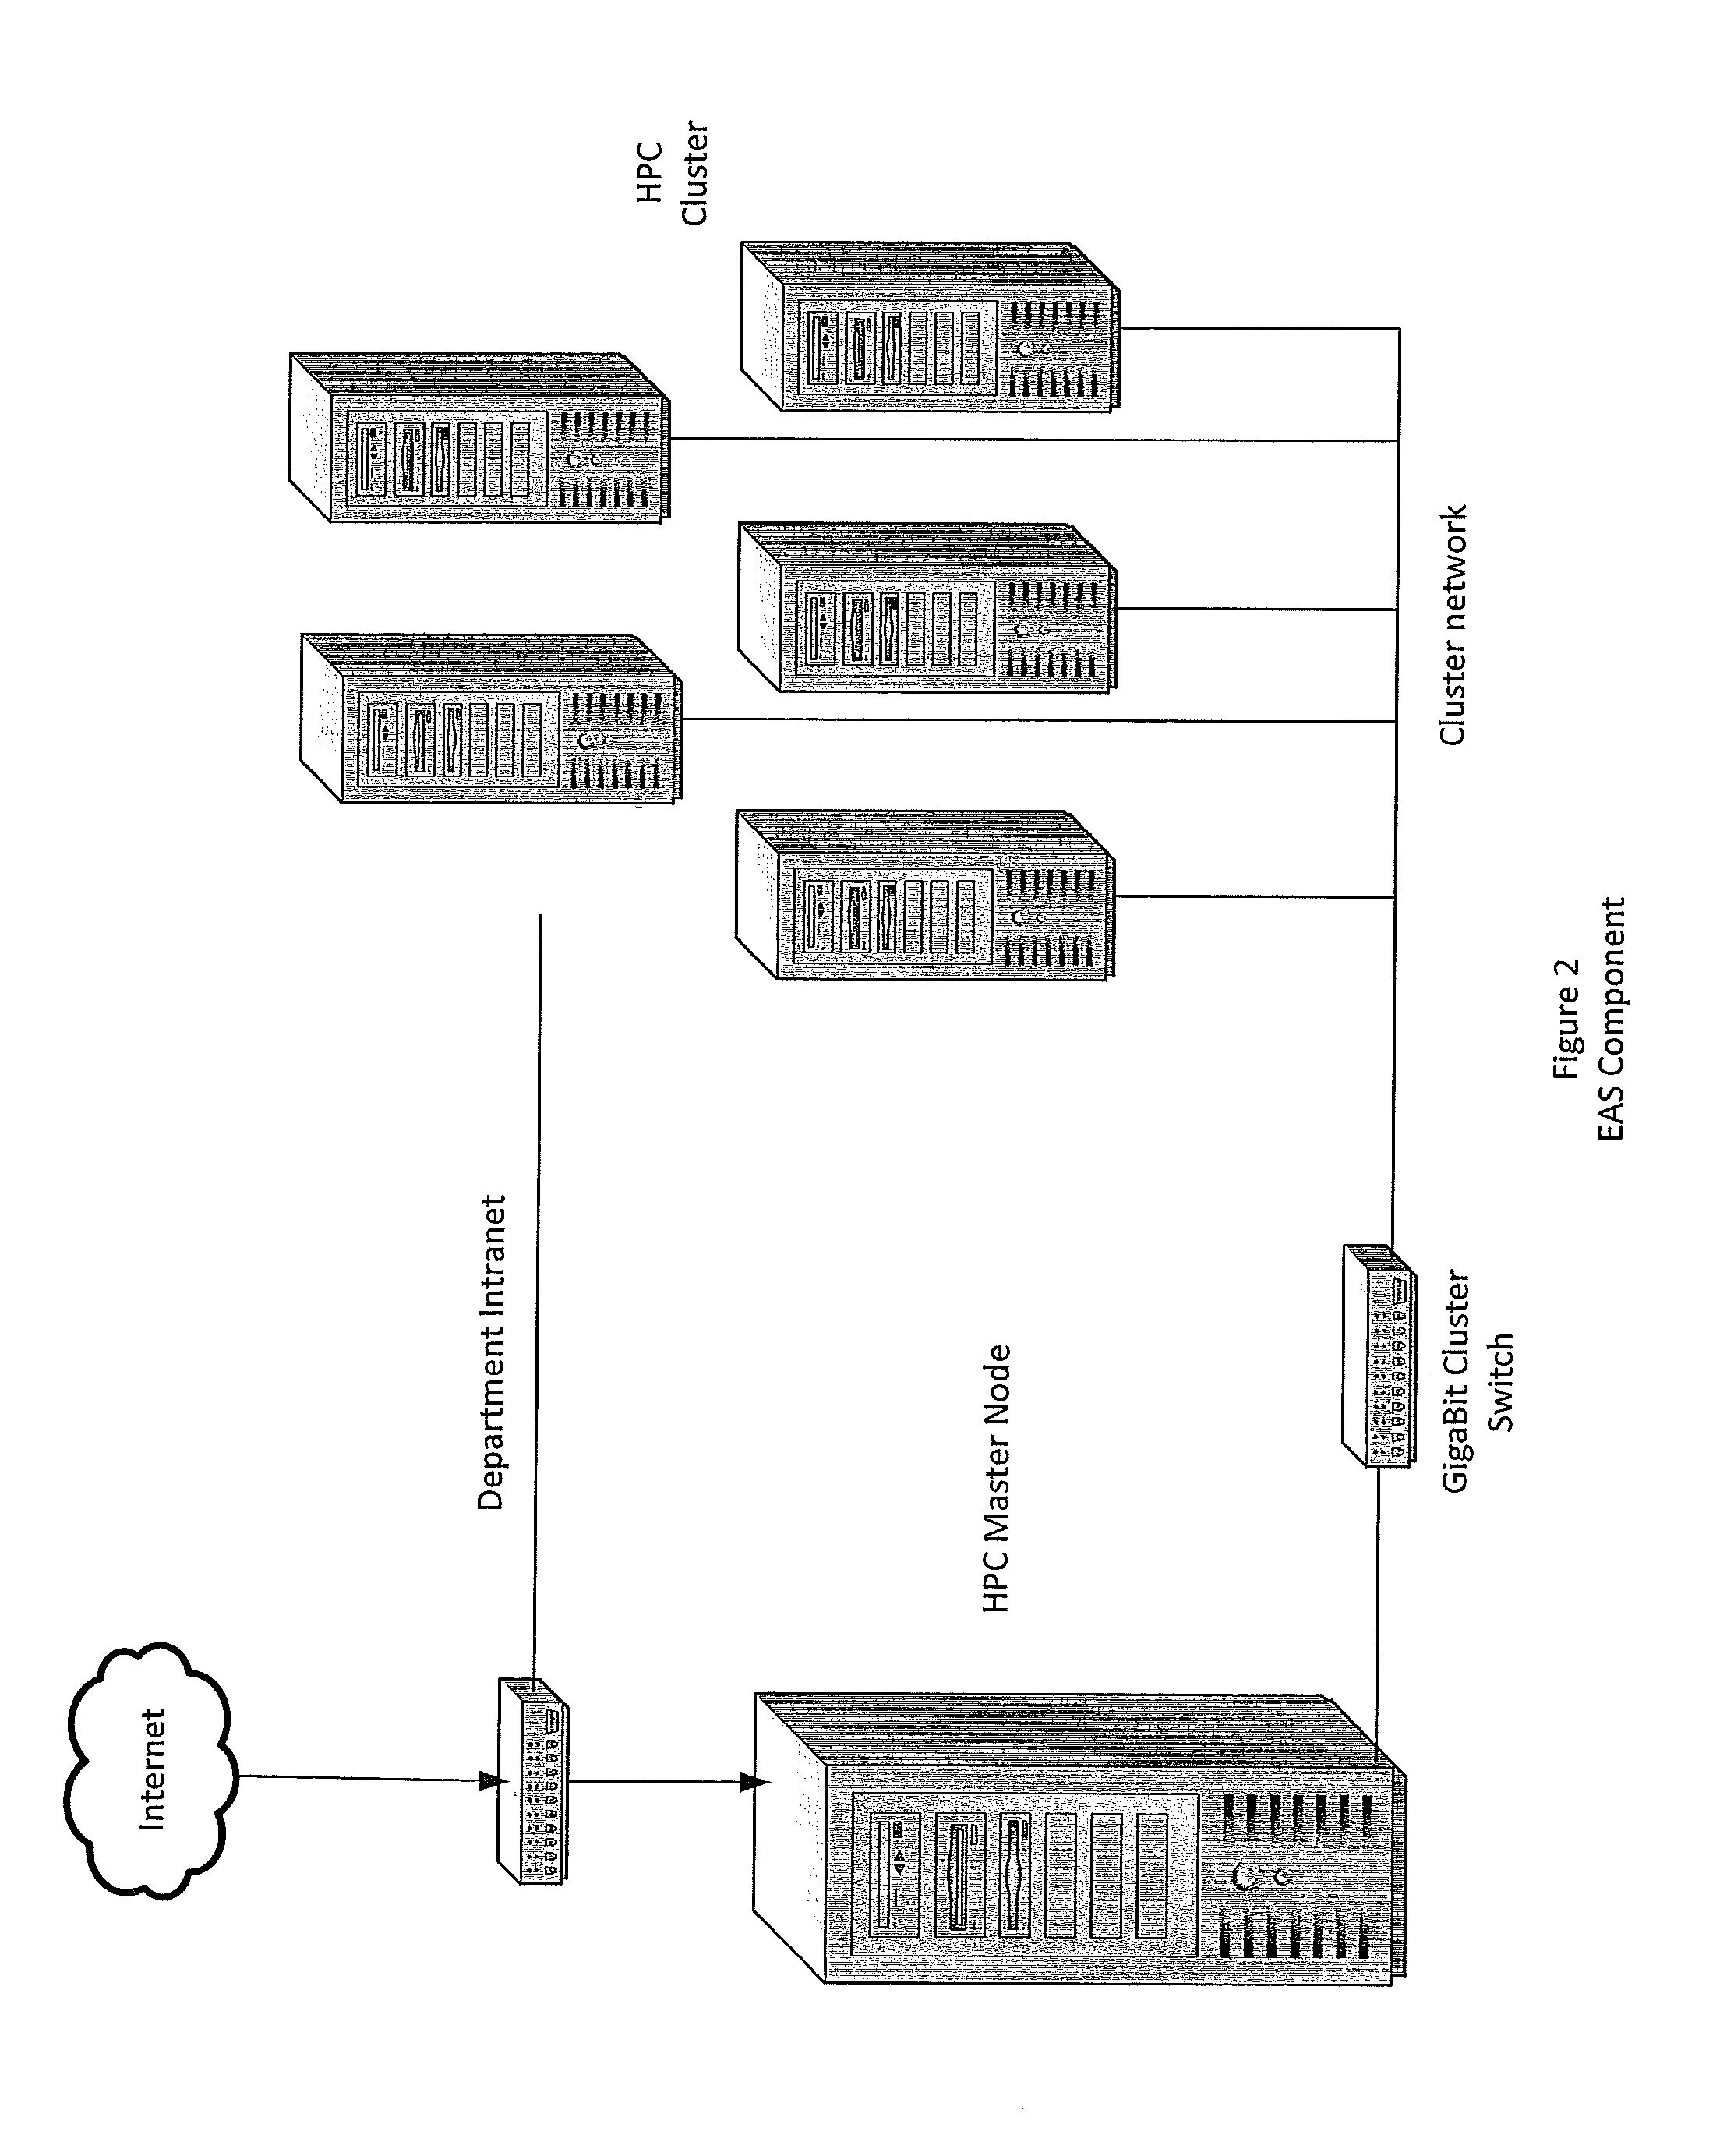 Apparatus and method for providing environmental predictive indicators to emergency response managers